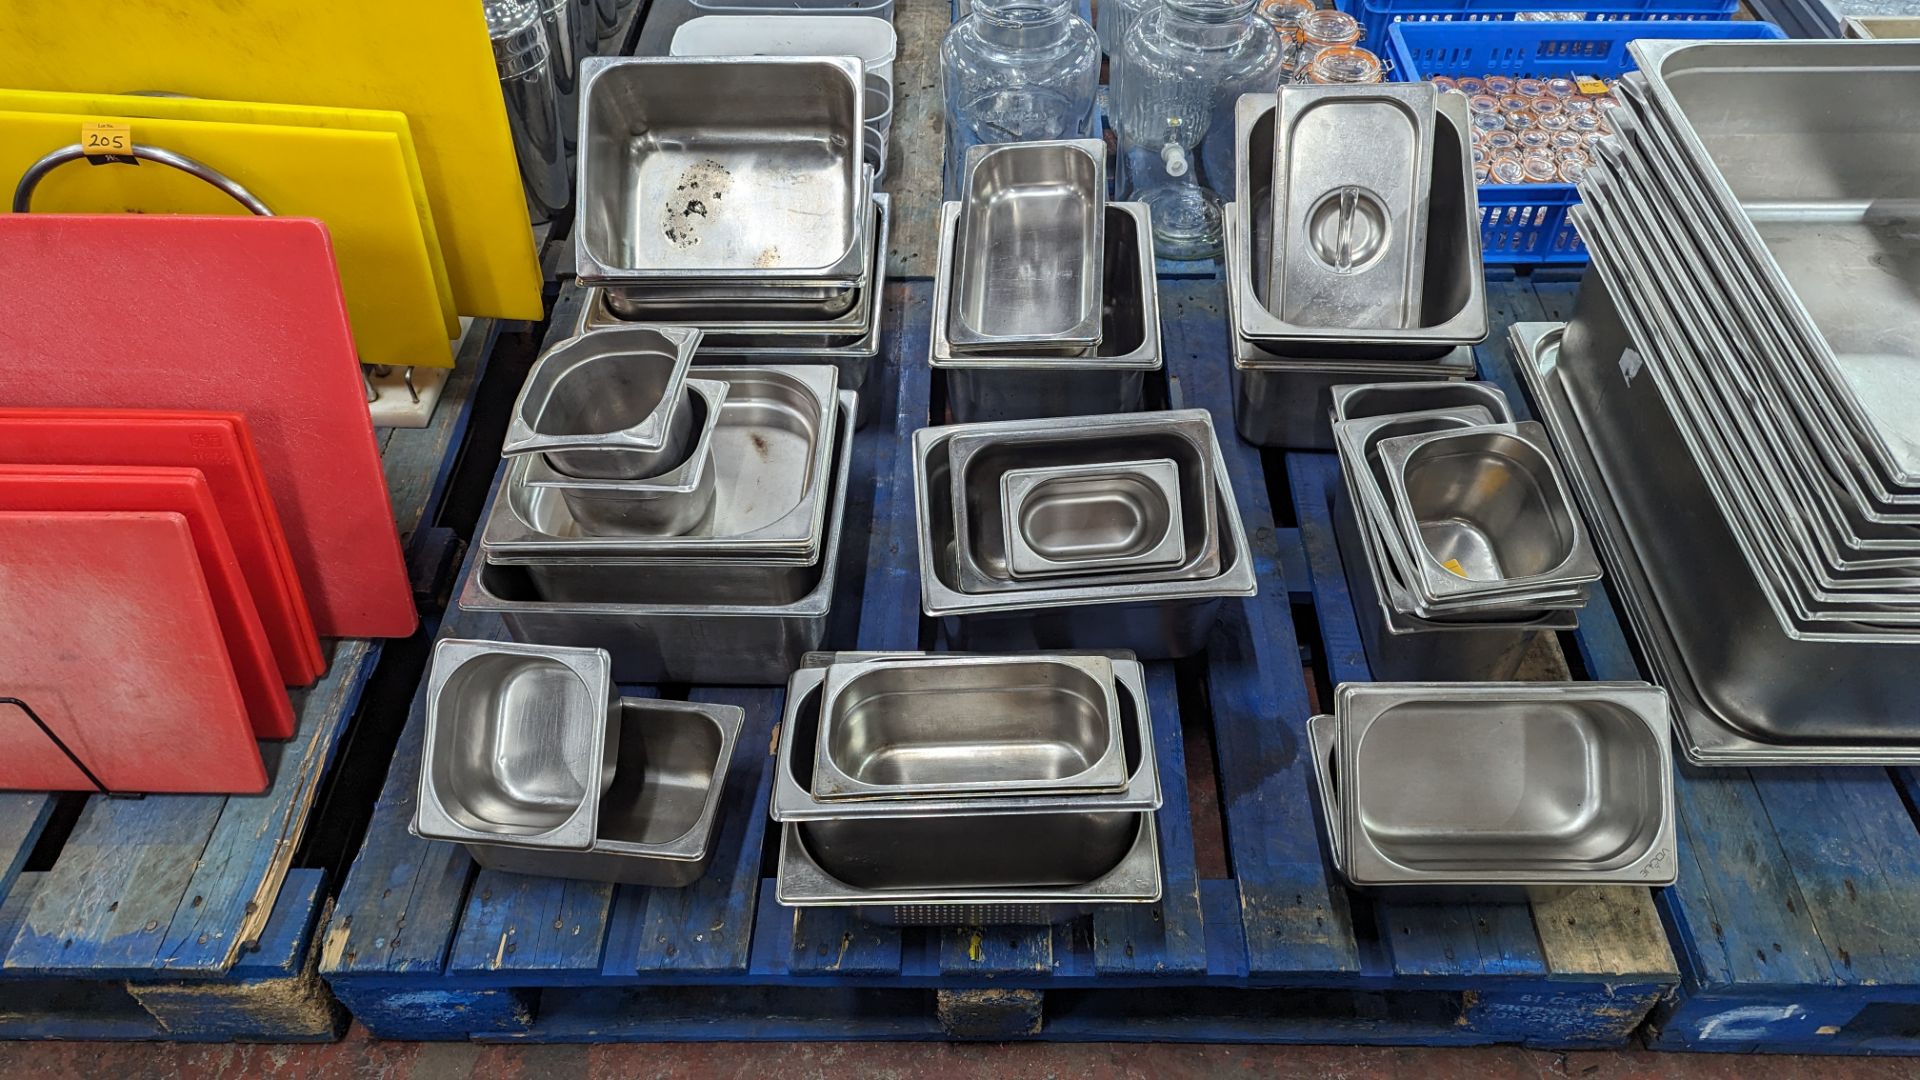 The contents of a pallet of assorted stainless steel trays, dishes, lids & more - approximately 43 i